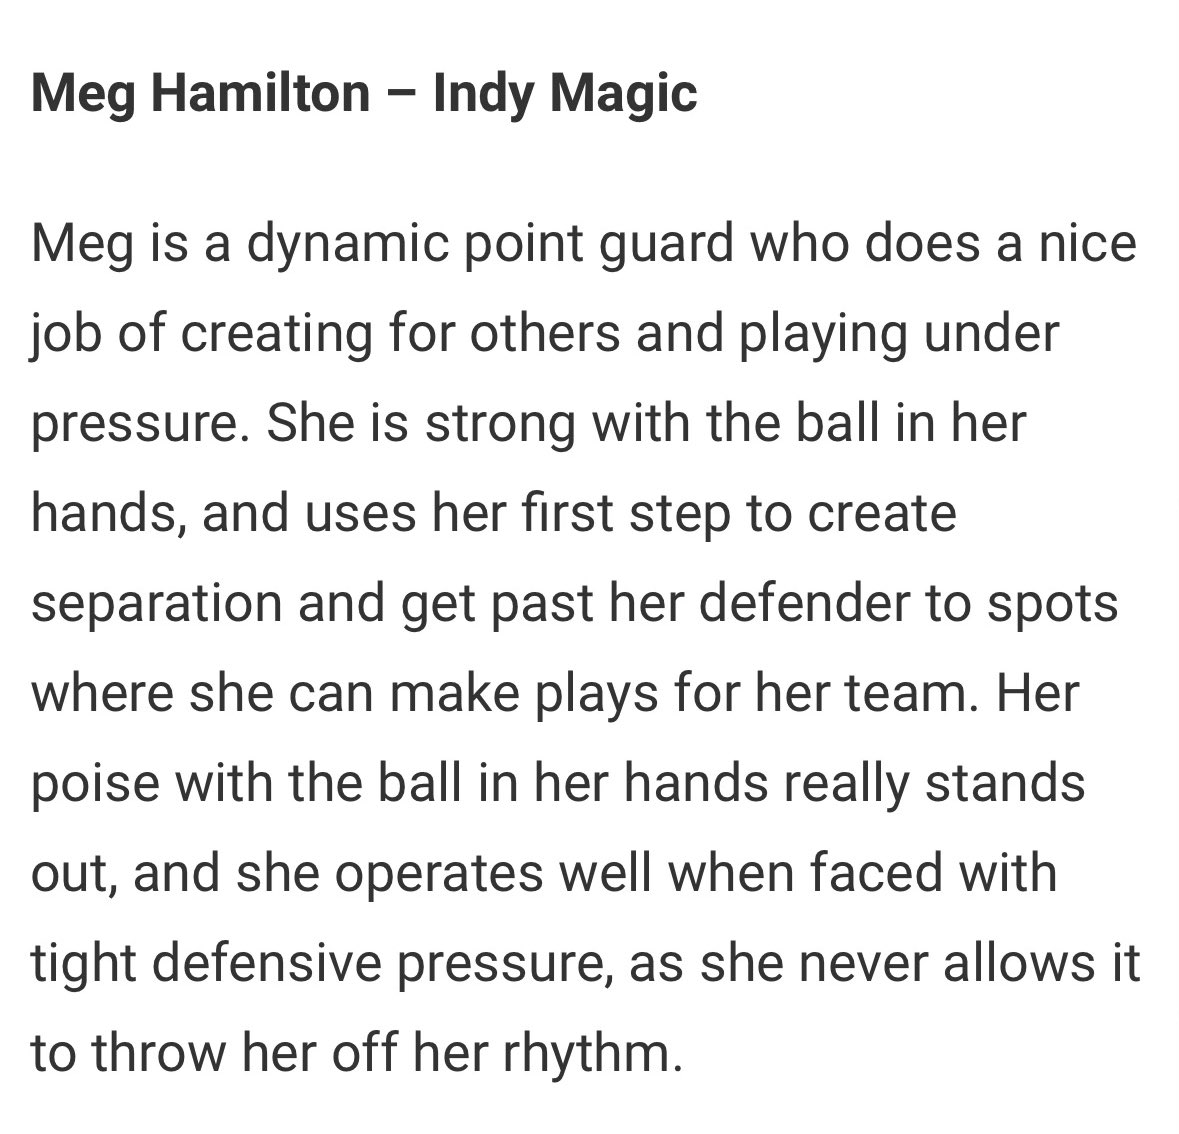 I enjoyed playing at the shamrock and can’t wait to get back at it this weekend for the Always 100 Spring Bling with my @IndyMagic teammates 🏀 Thank you @JrAllStarIN for the write up! @Kelvin9475